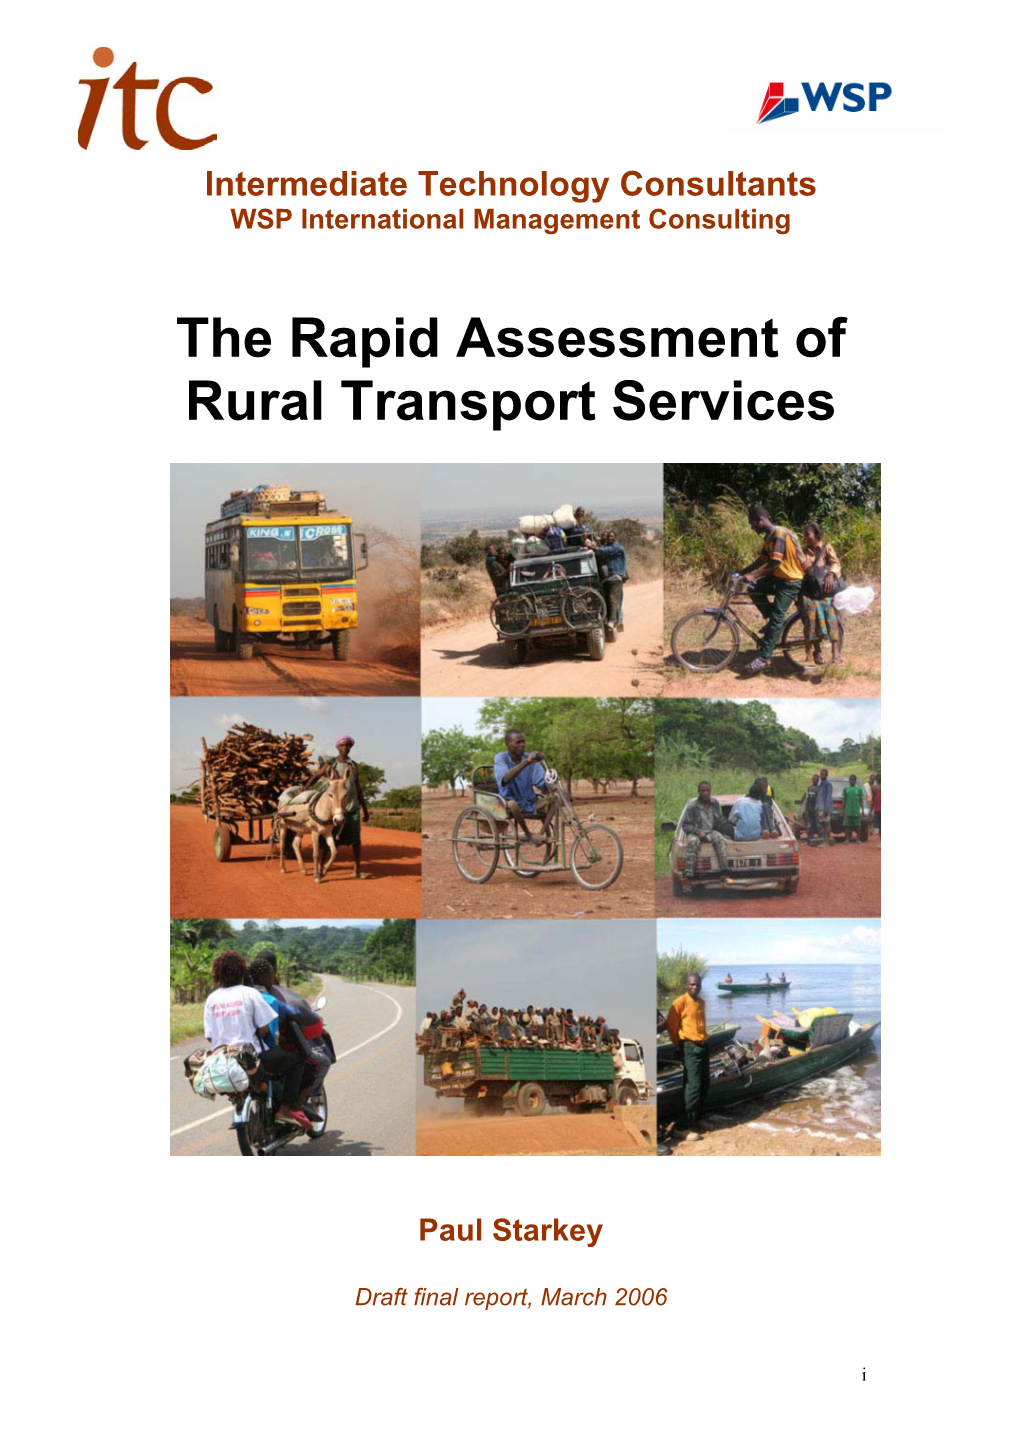 The Rapid Assessment of Rural Transport Services